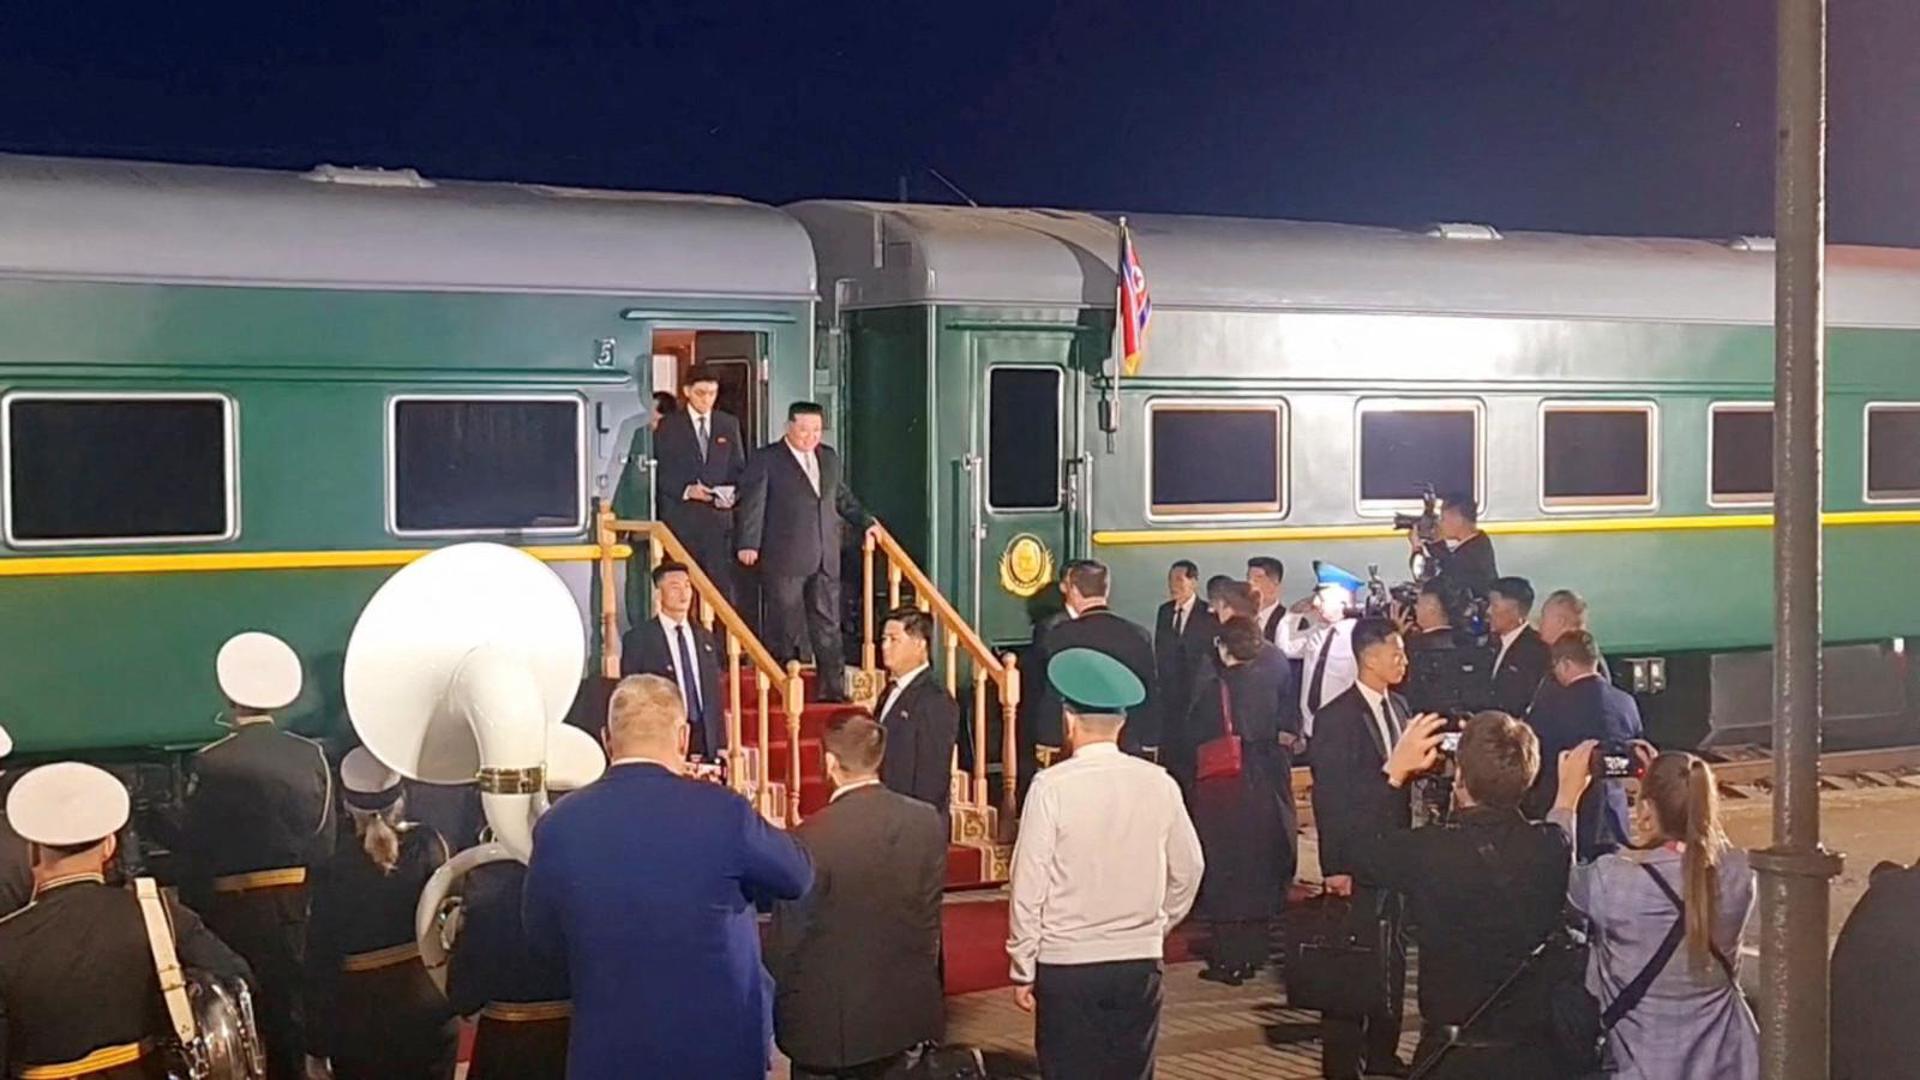 A view shows North Korean leader Kim Jong Un disembarking from his train in Russia and being greeted by Russian officials in the Primorsky region, Russia, in this still image from video published September 12, 2023. Courtesy Russia's Minister of Natural Resources and Environment Alexander Kozlov Telegram Channel via REUTERS ATTENTION EDITORS - THIS IMAGE WAS PROVIDED BY A THIRD PARTY. NO RESALES. NO ARCHIVES. MANDATORY CREDIT. Photo: ALEXANDER KOZLOV TELEGRAM CHANNE/REUTERS